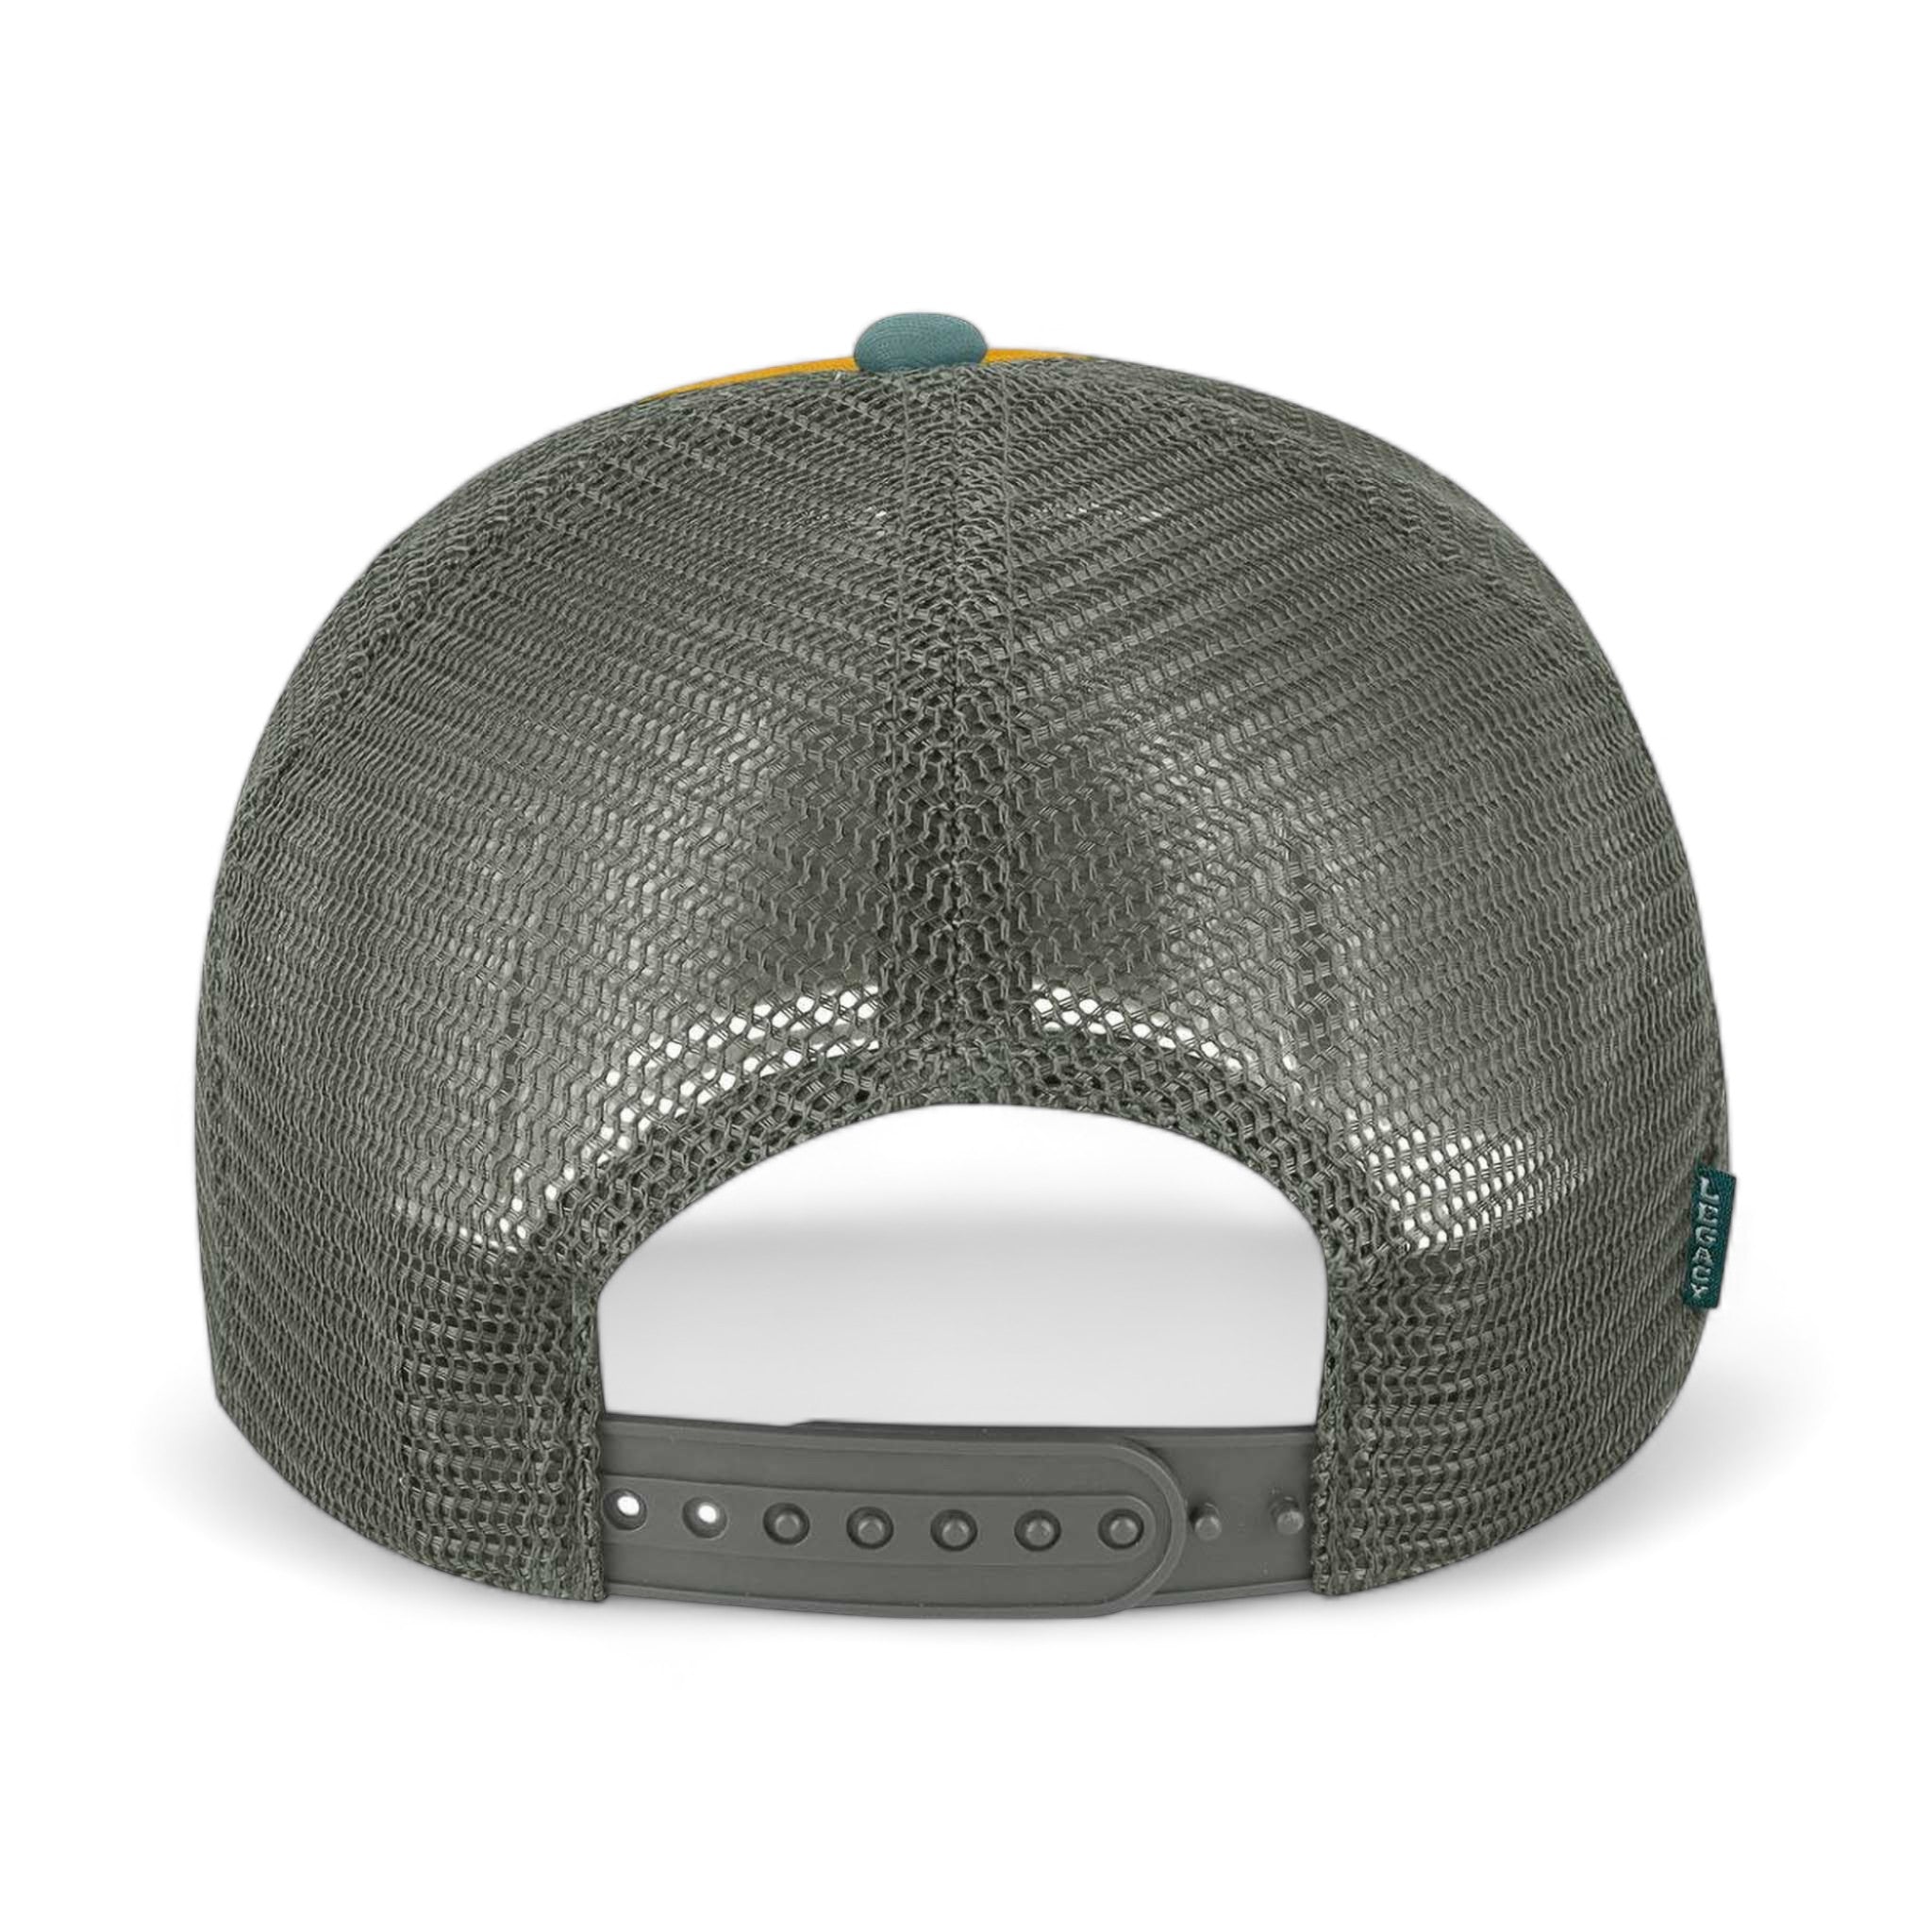 Back view of LEGACY LTA custom hat in bronze and pine green